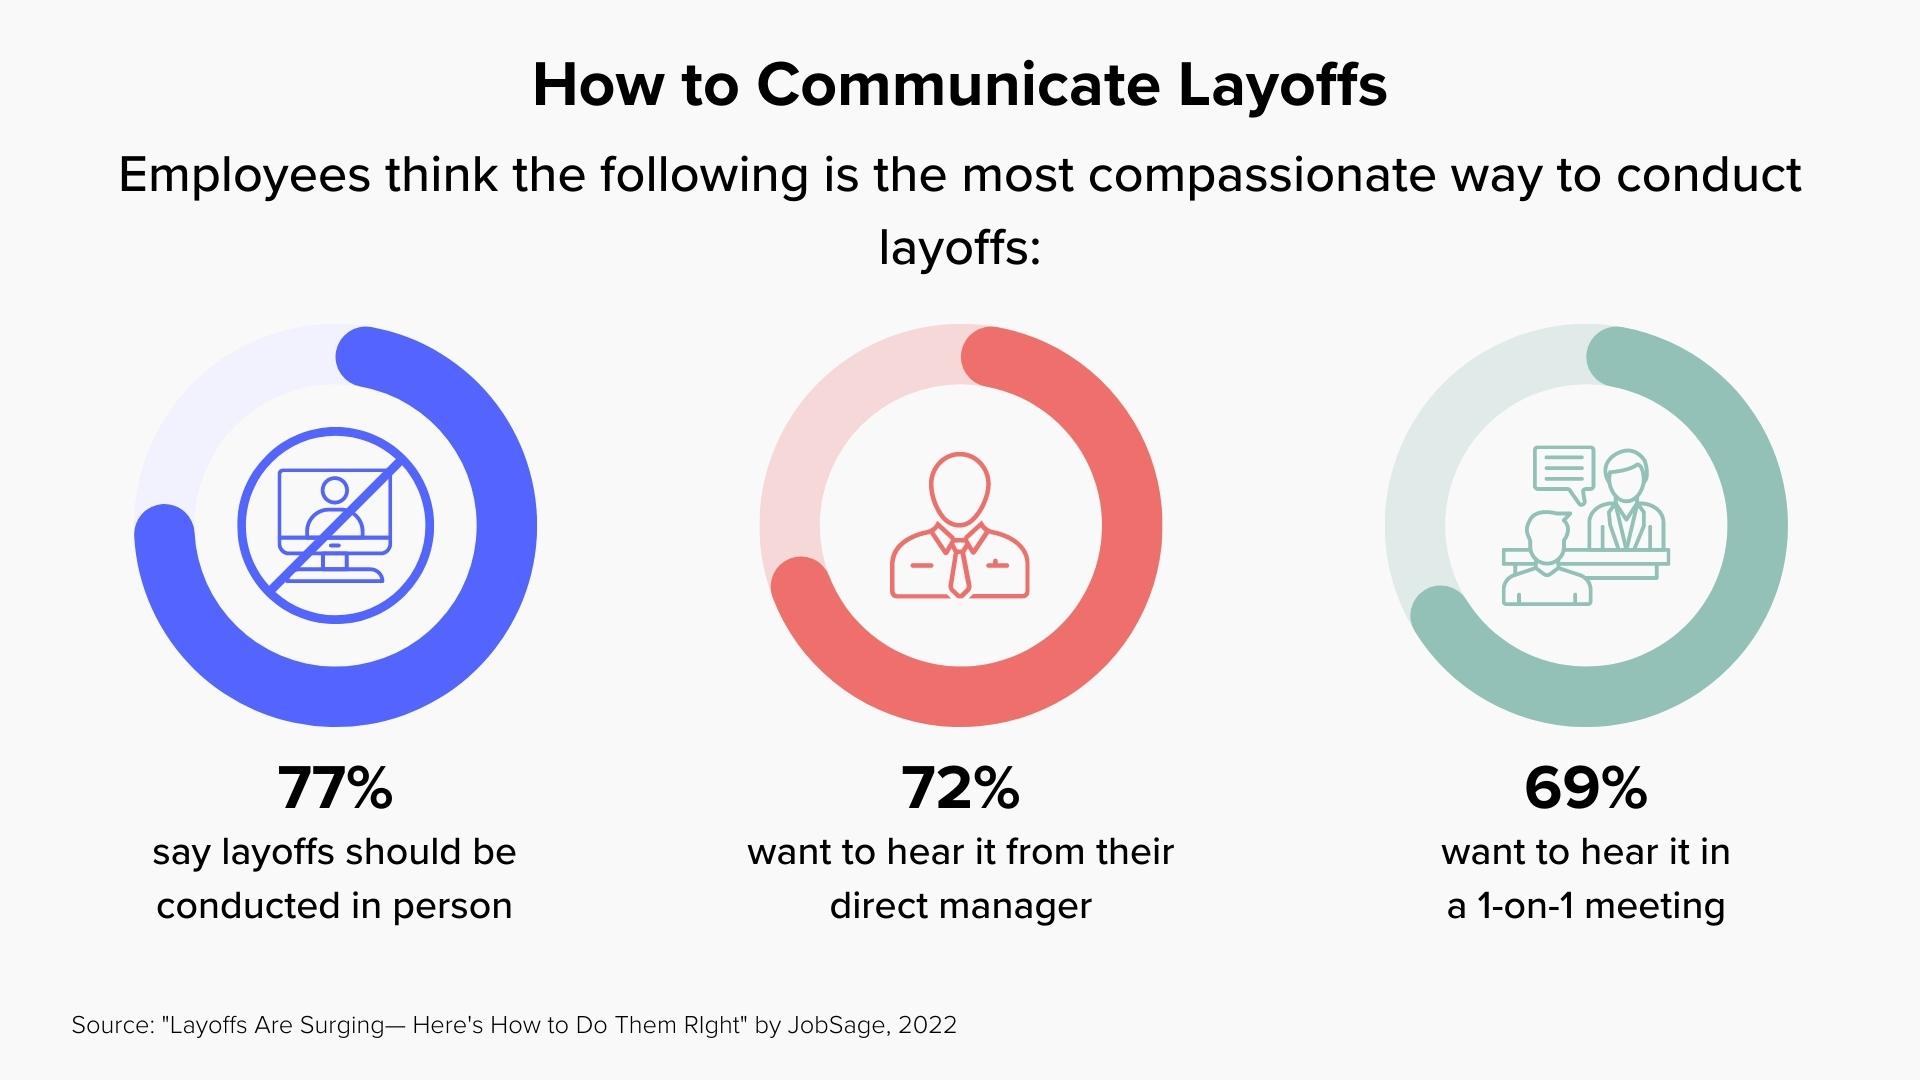 How to communicate layoffs to employees: in person, from direct manager, in a 1-on-1 meeting